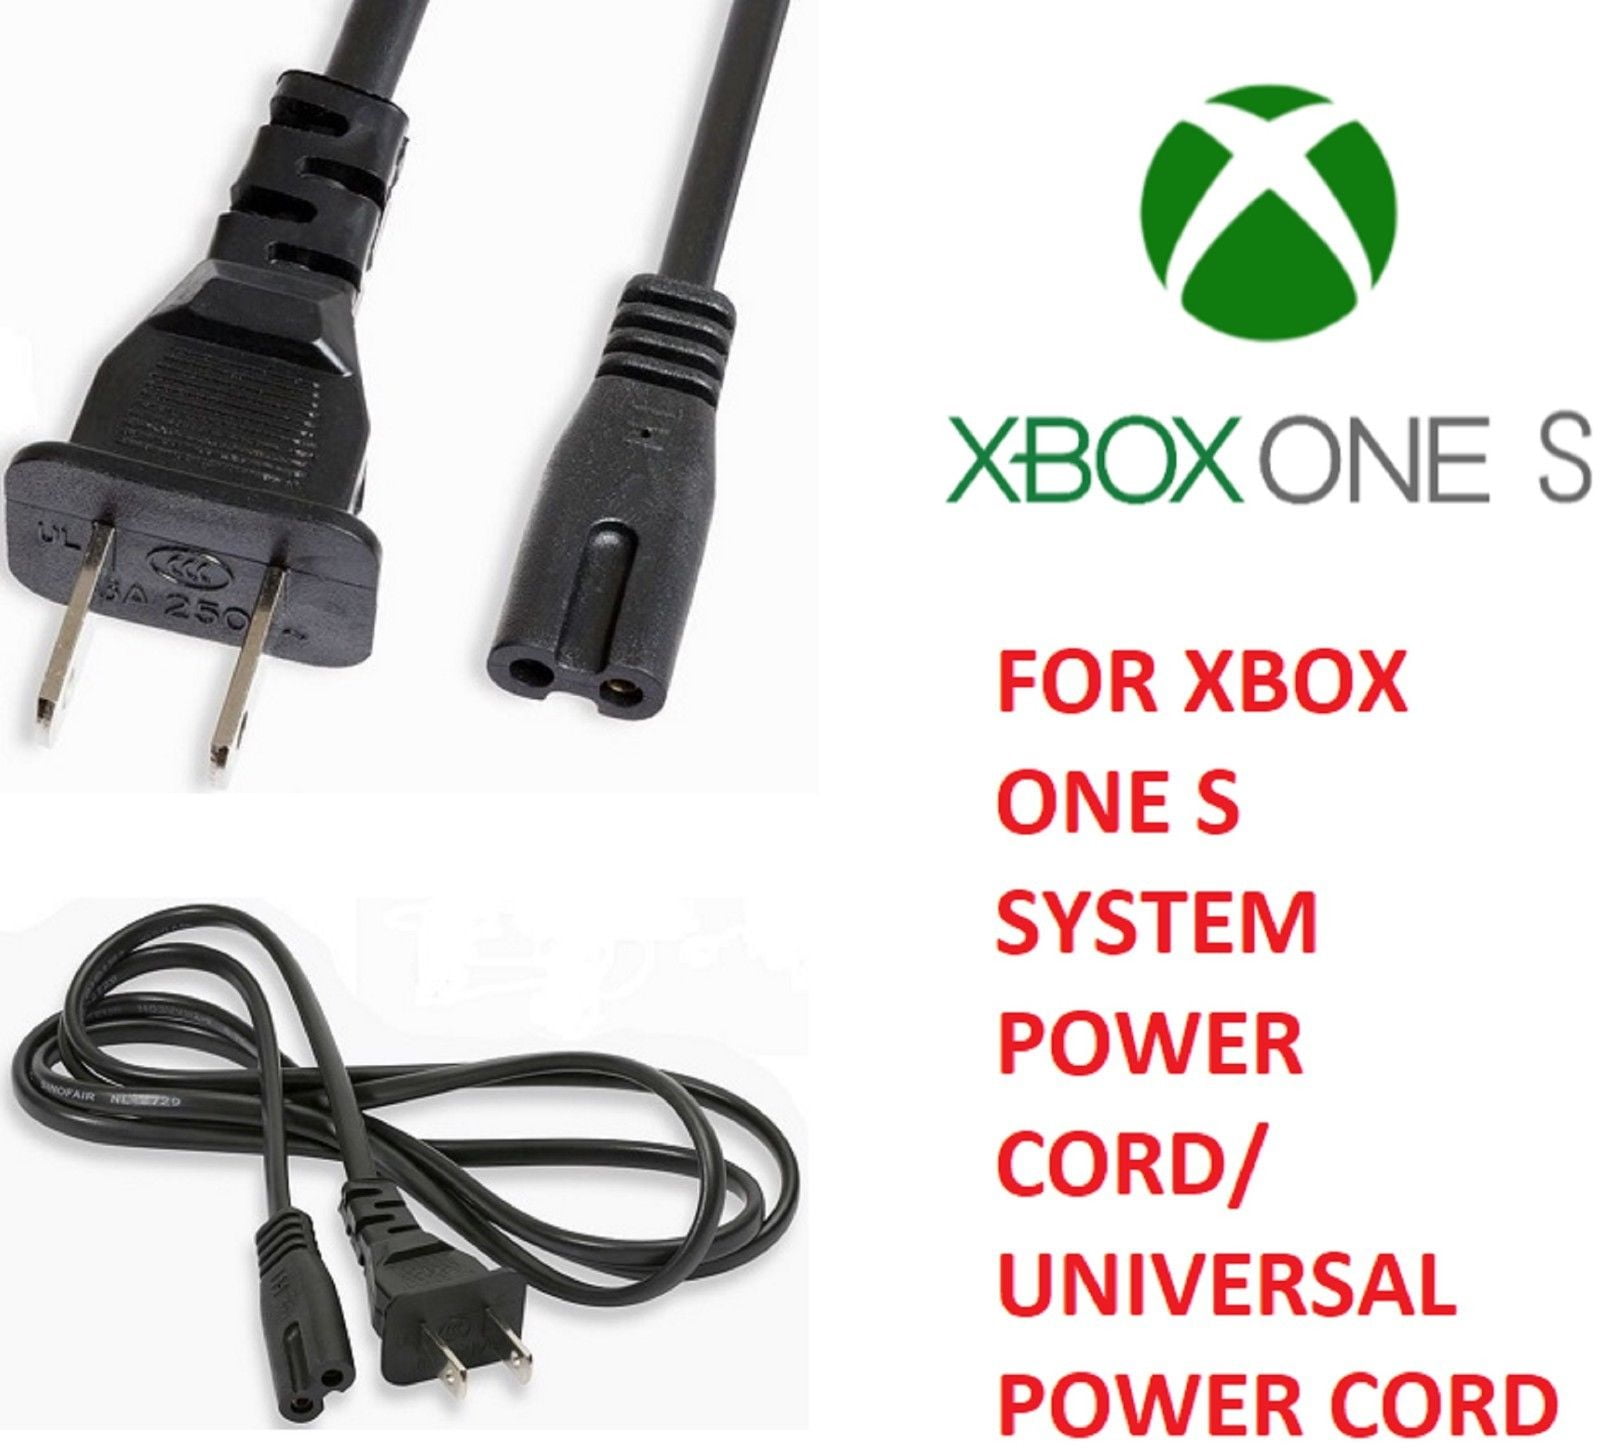 PlayStation 4 Pro Xbox 360 2-Prong 6 Feet Gaming AC Power Cord For Xbox One